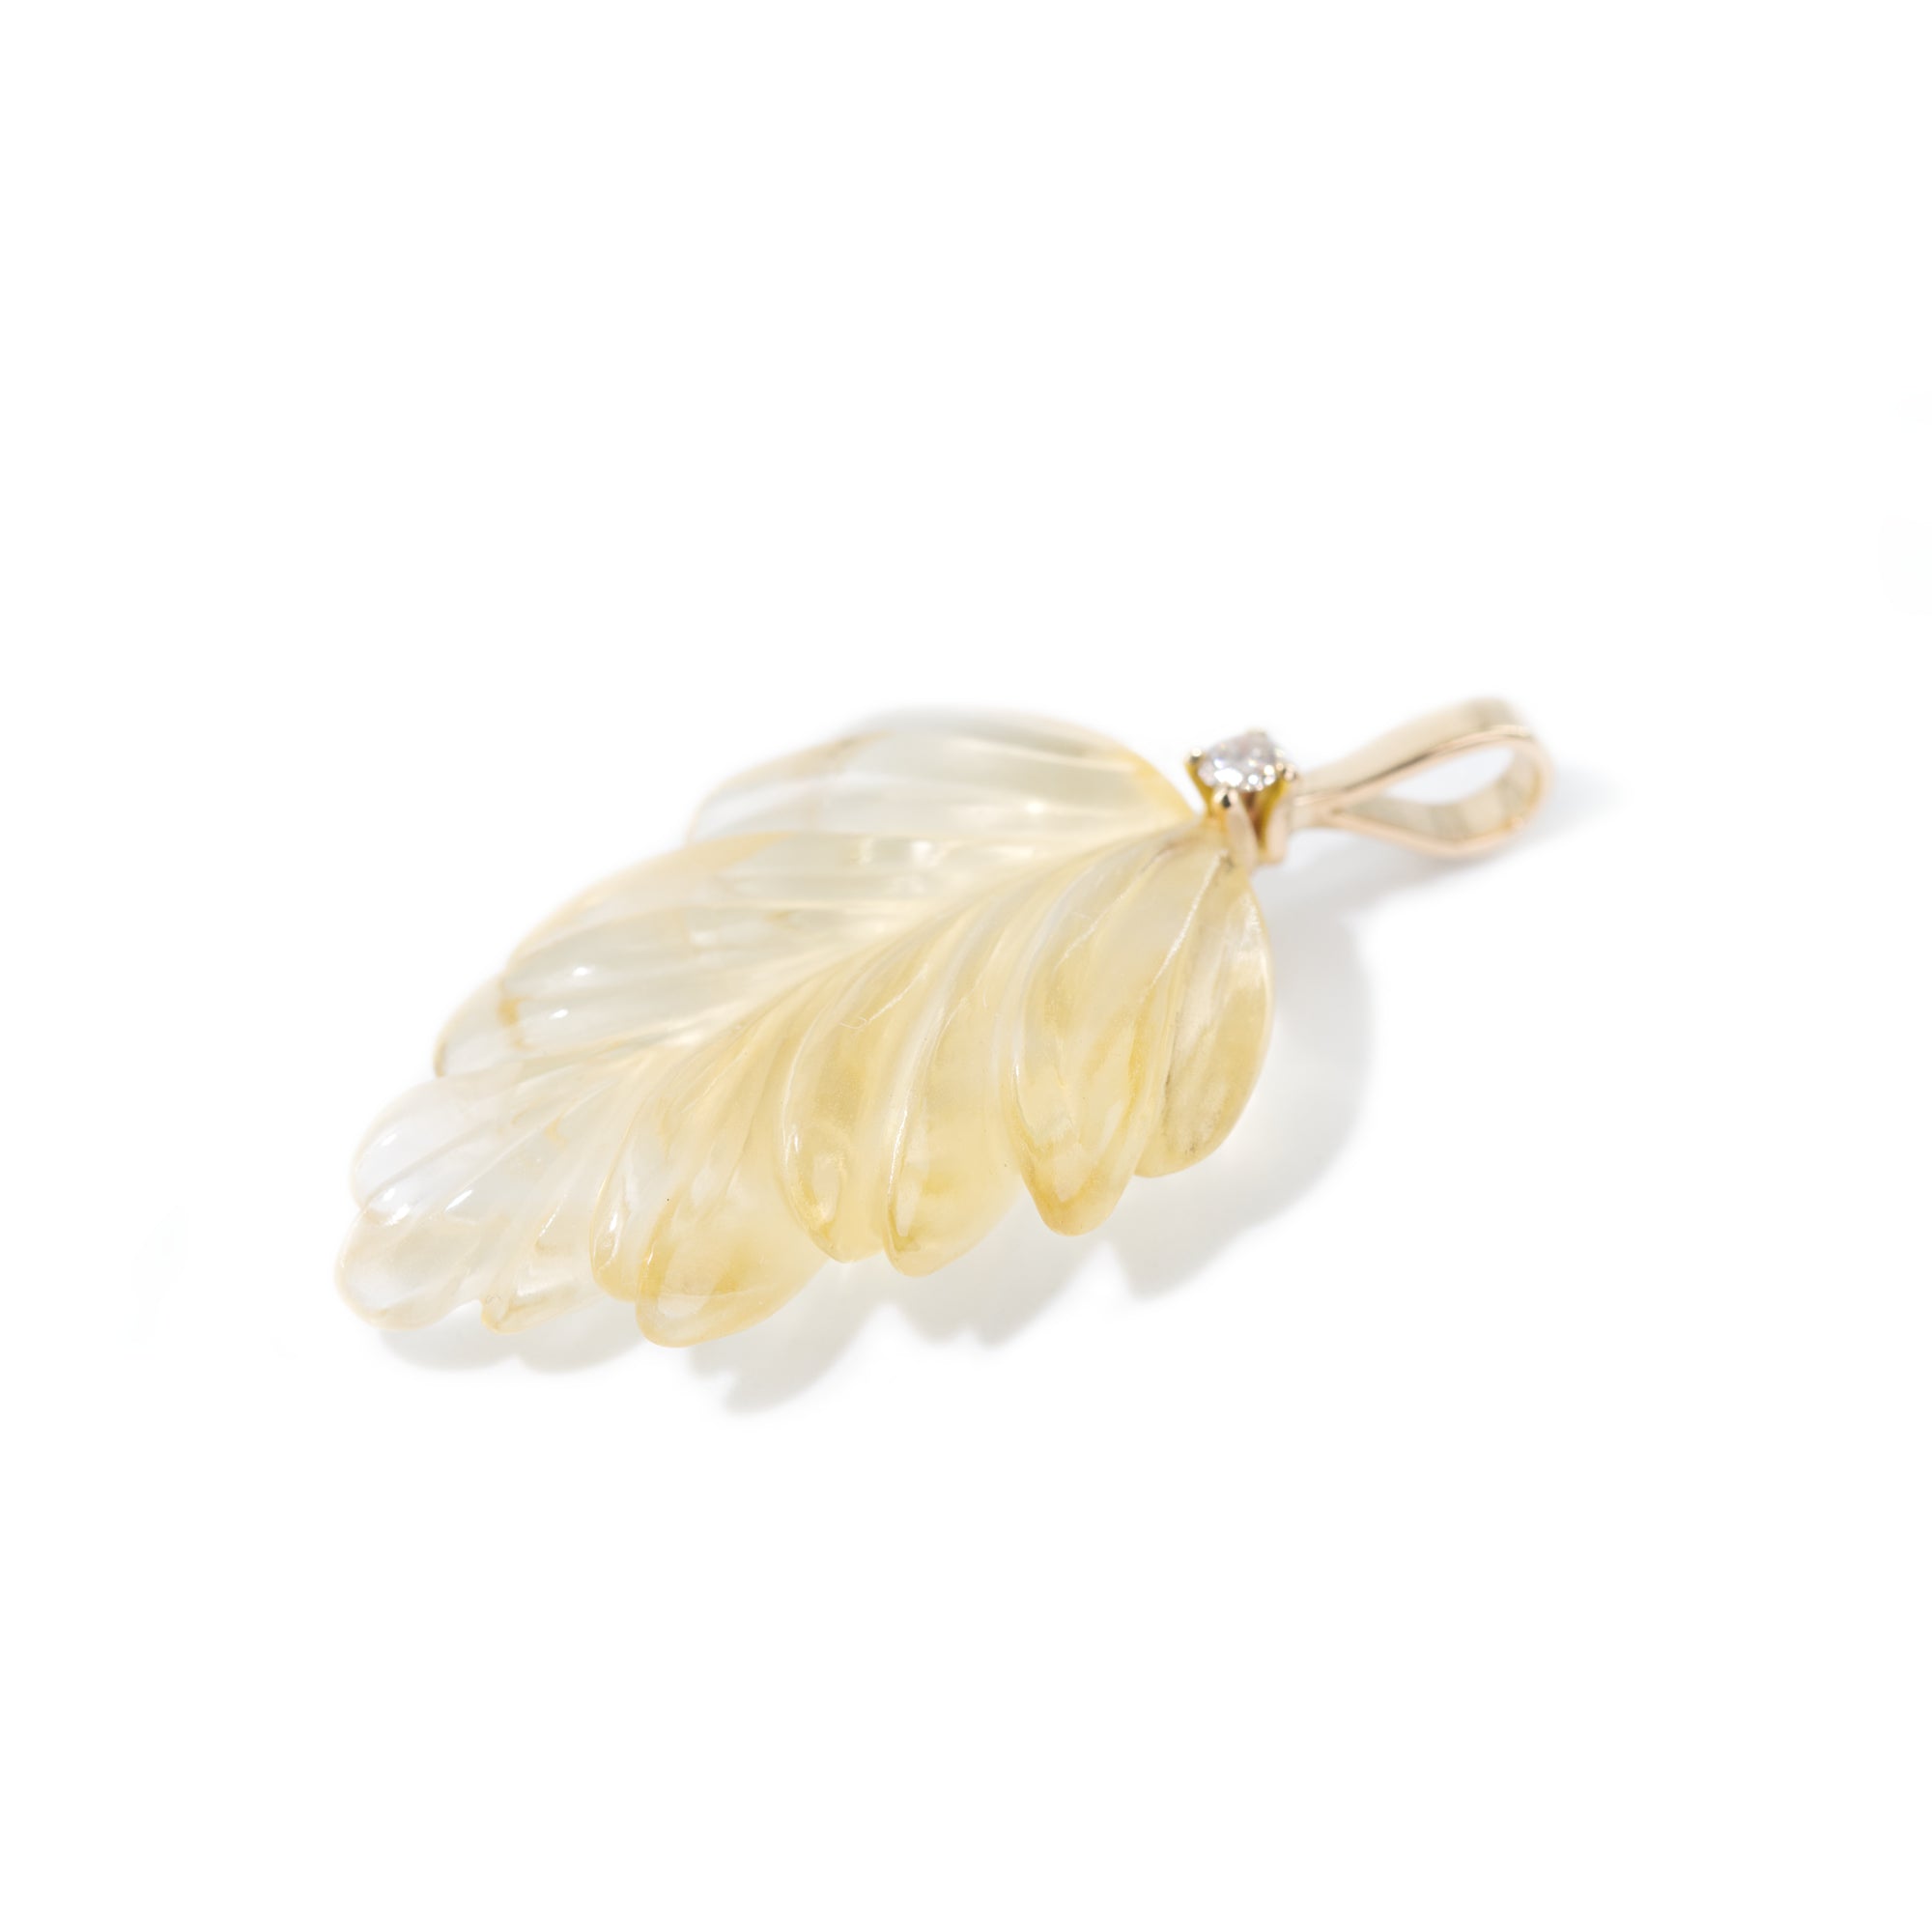 The photo features hand-carved citrine leaf pendant. The pendant is placed on the side to present the detailed work of hand-carving.